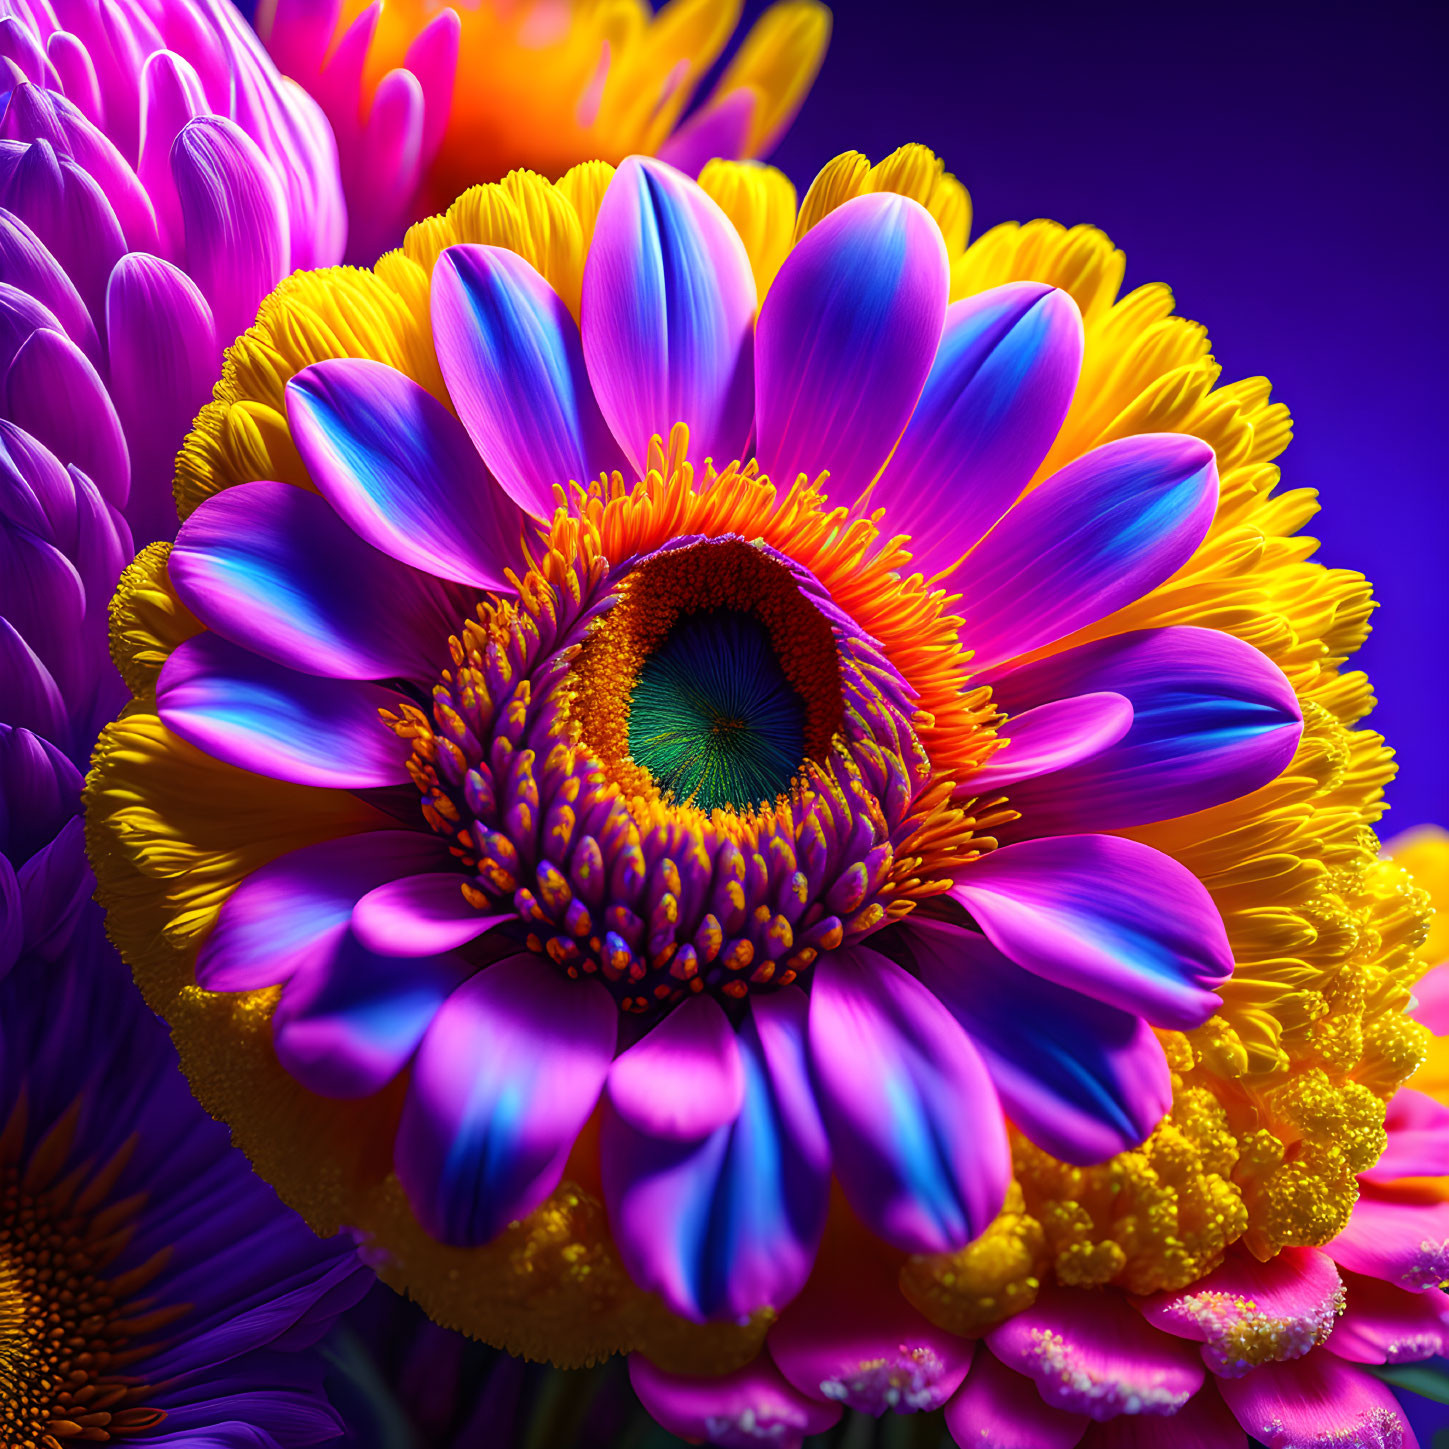 Detailed Close-Up of Purple and Yellow Flower's Textures and Colors